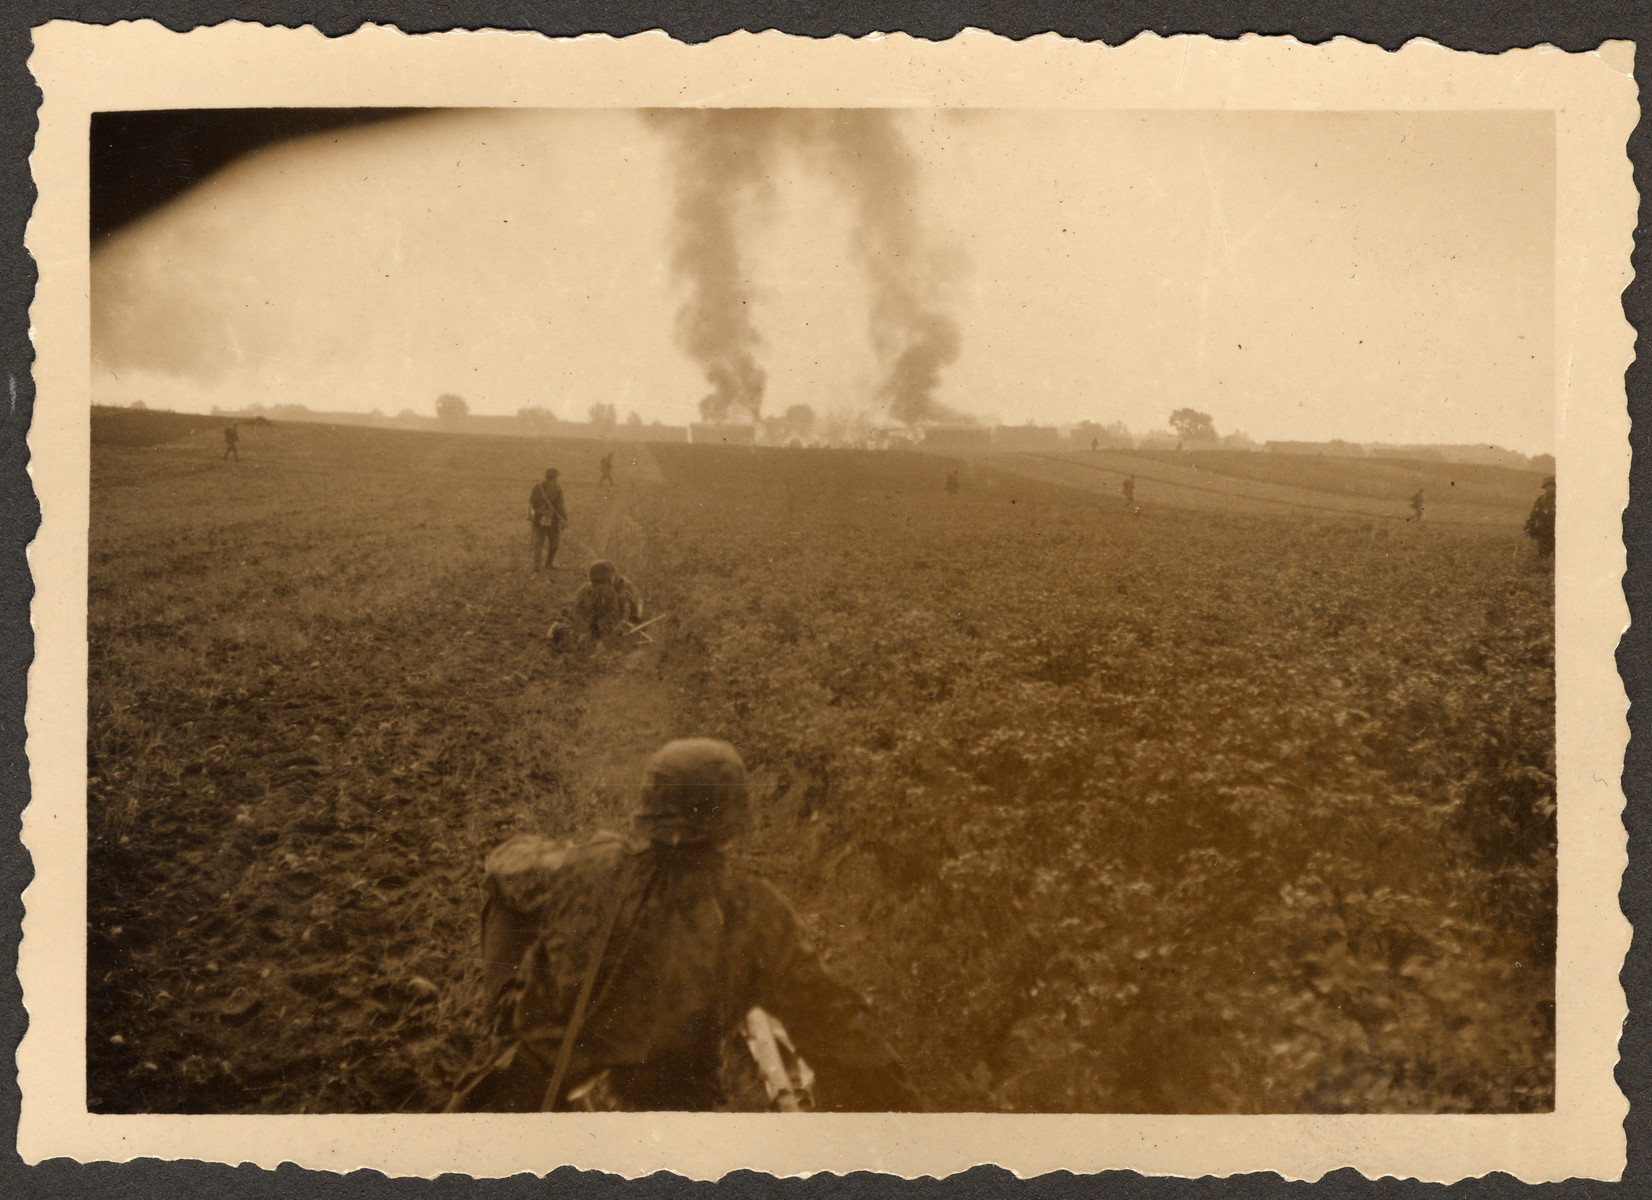 German soldiers during the Battle of Mlawa, as part of the invasion of Poland.

Original German caption read: "Action with *, * (burning village) in the Battle with Mlawa."